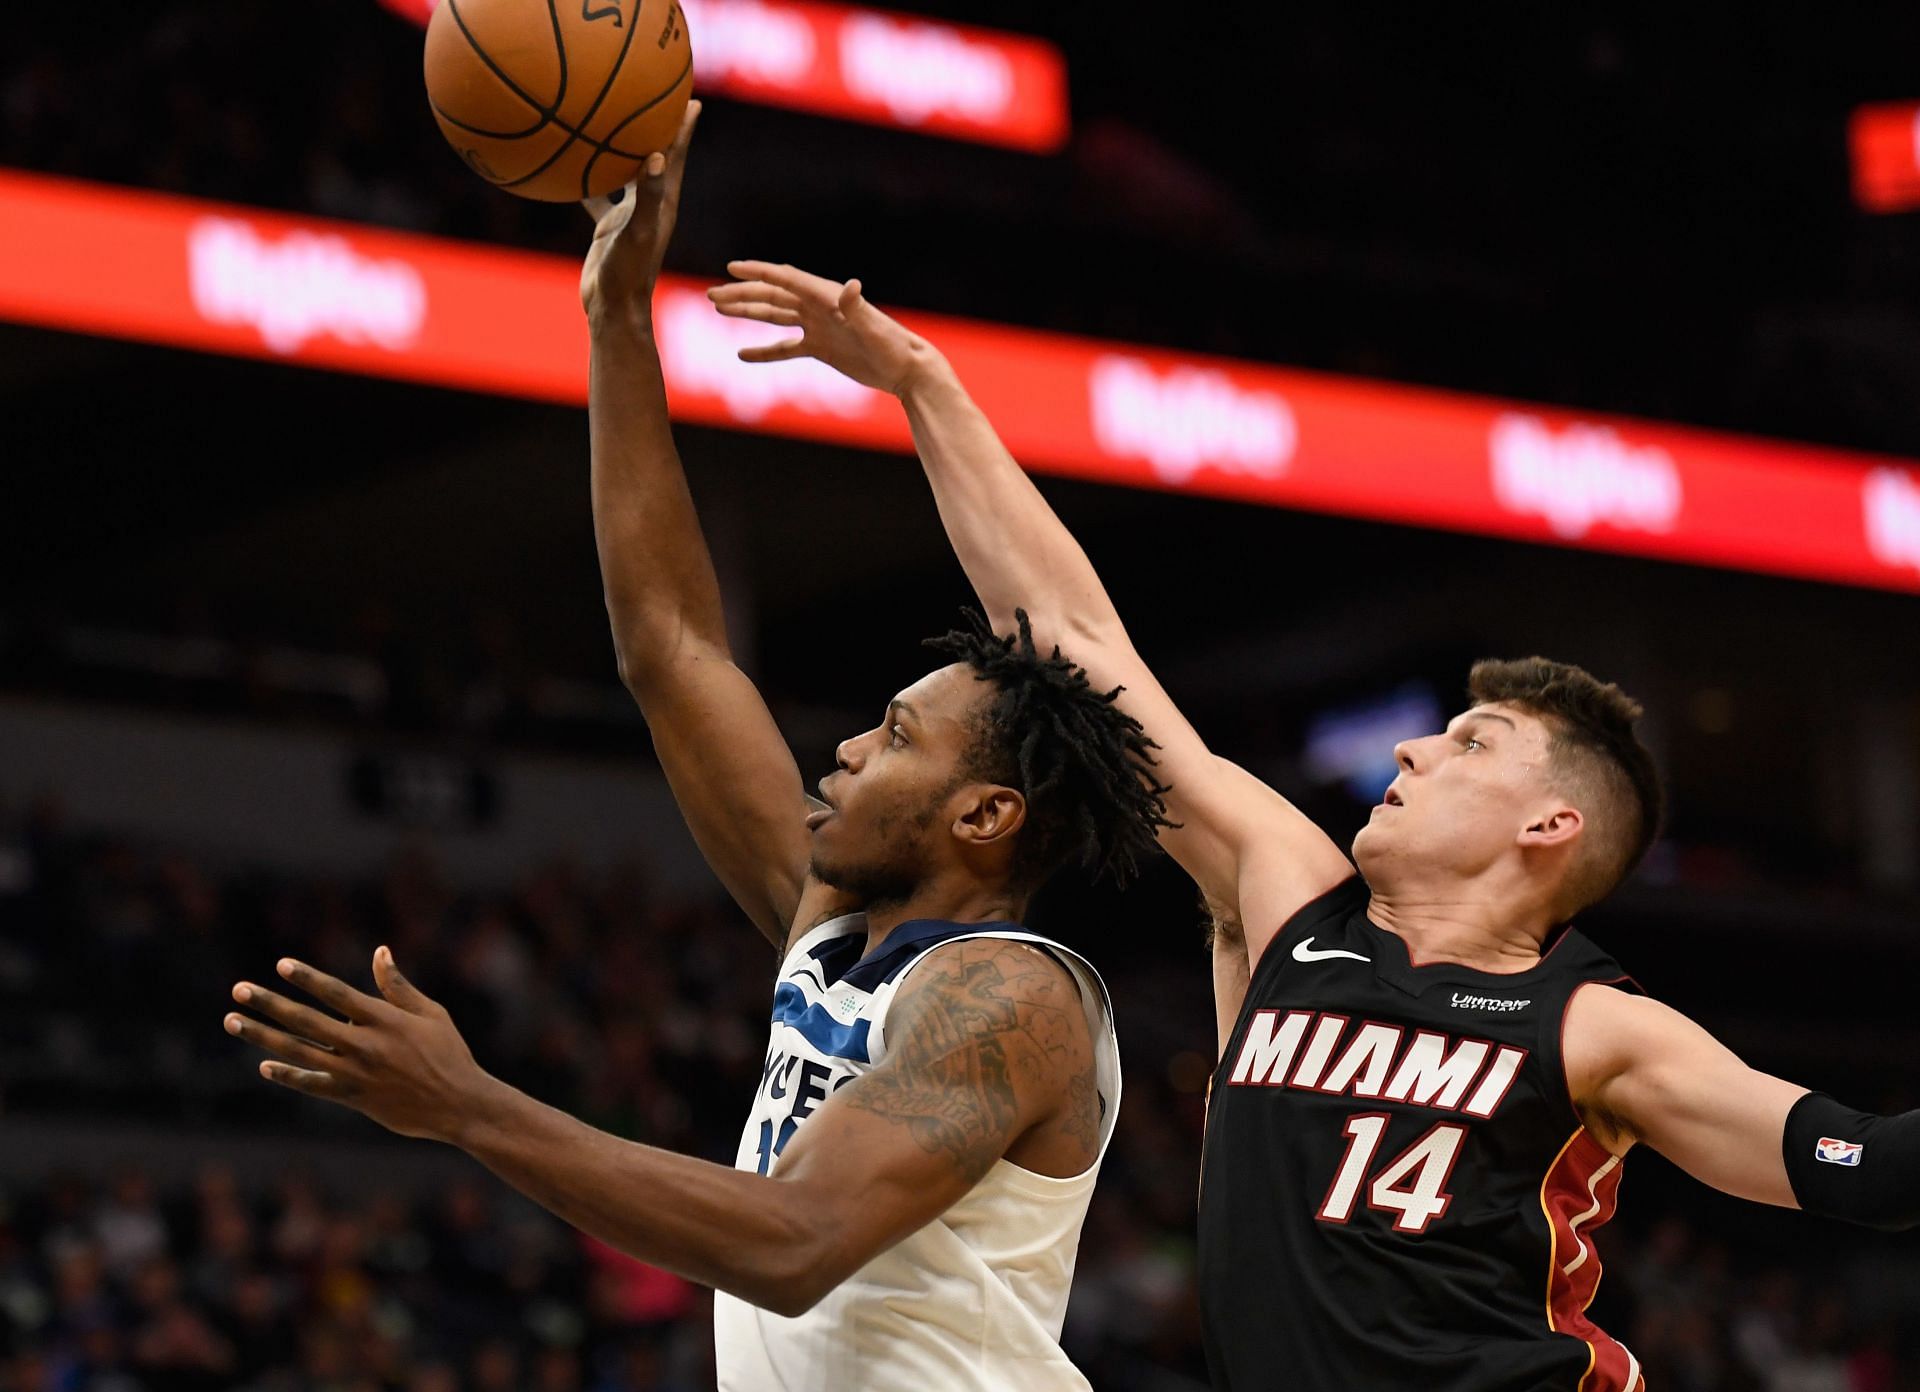 The Minnesota Timberwolves will look to host the Miami Heat on November 24th